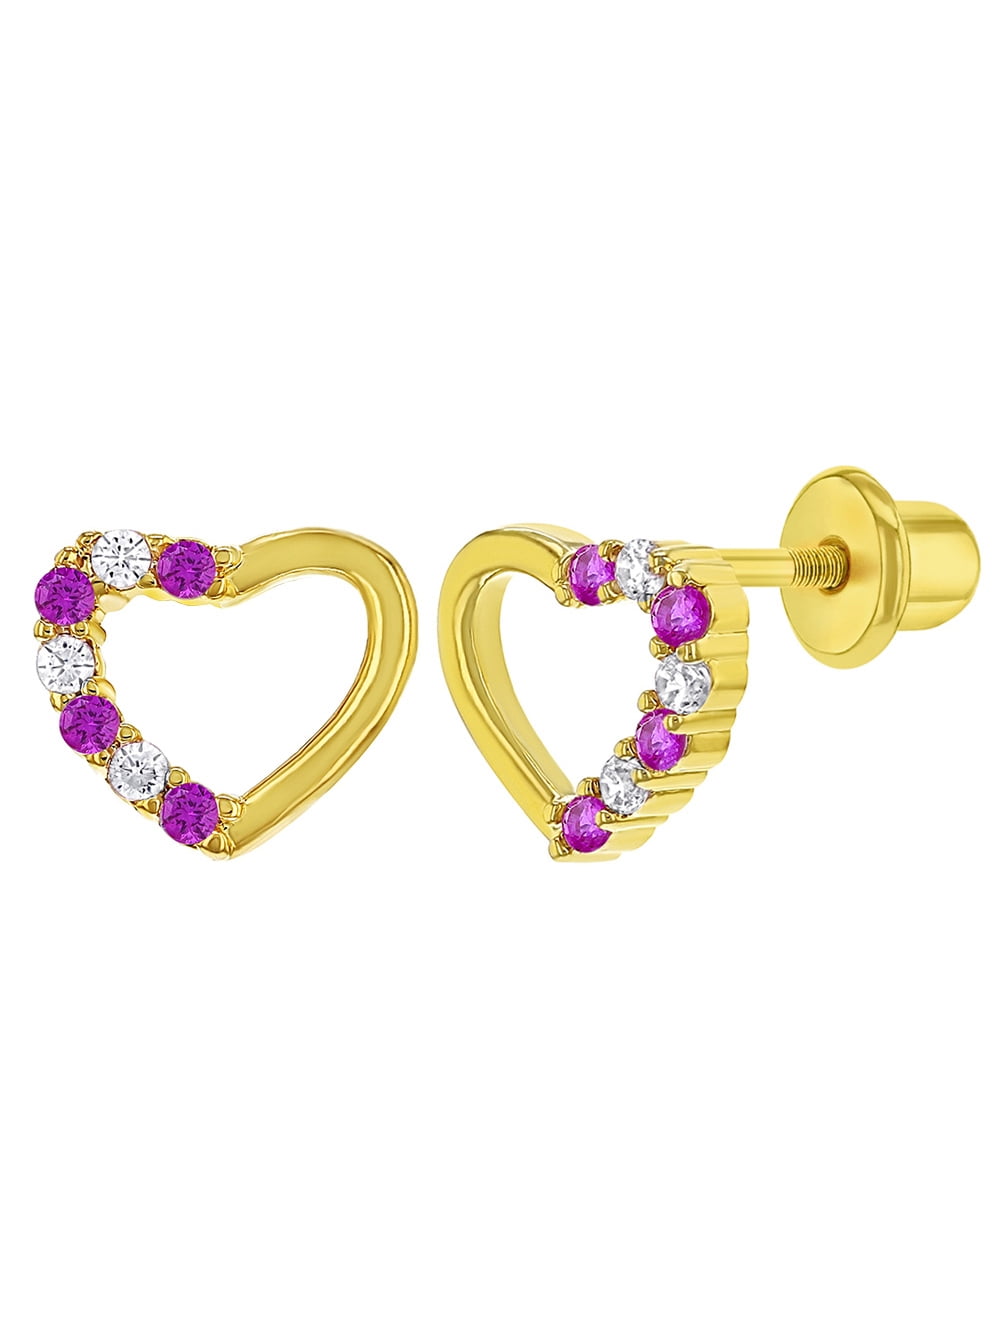 1gram gold combo ring earring with round stud for girl and baby